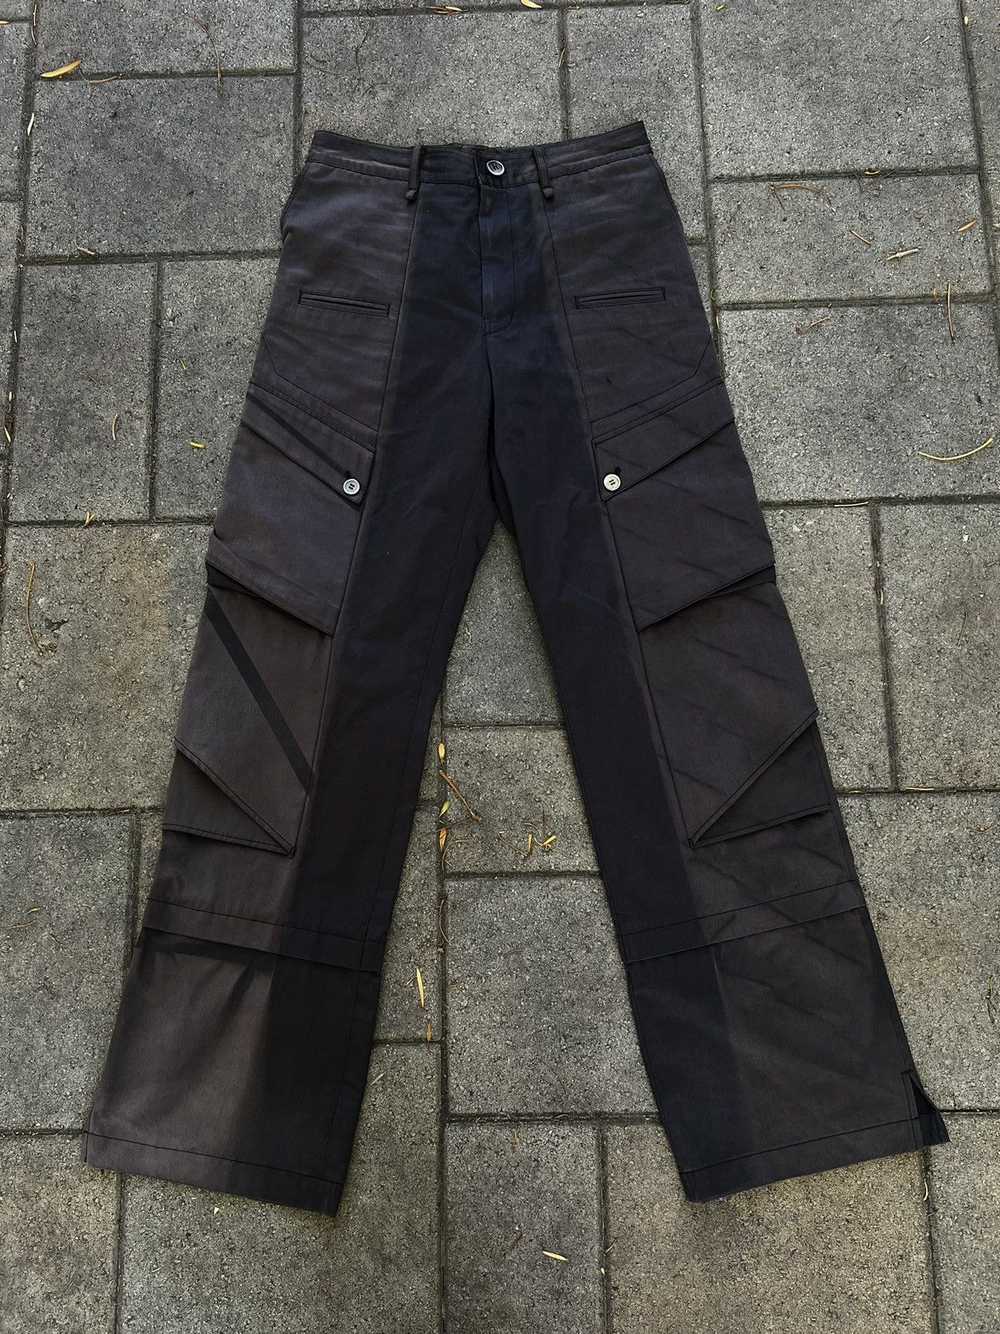 JiyongKim 2022 Sun-faded Barbed Wire Cargo Pants - image 2